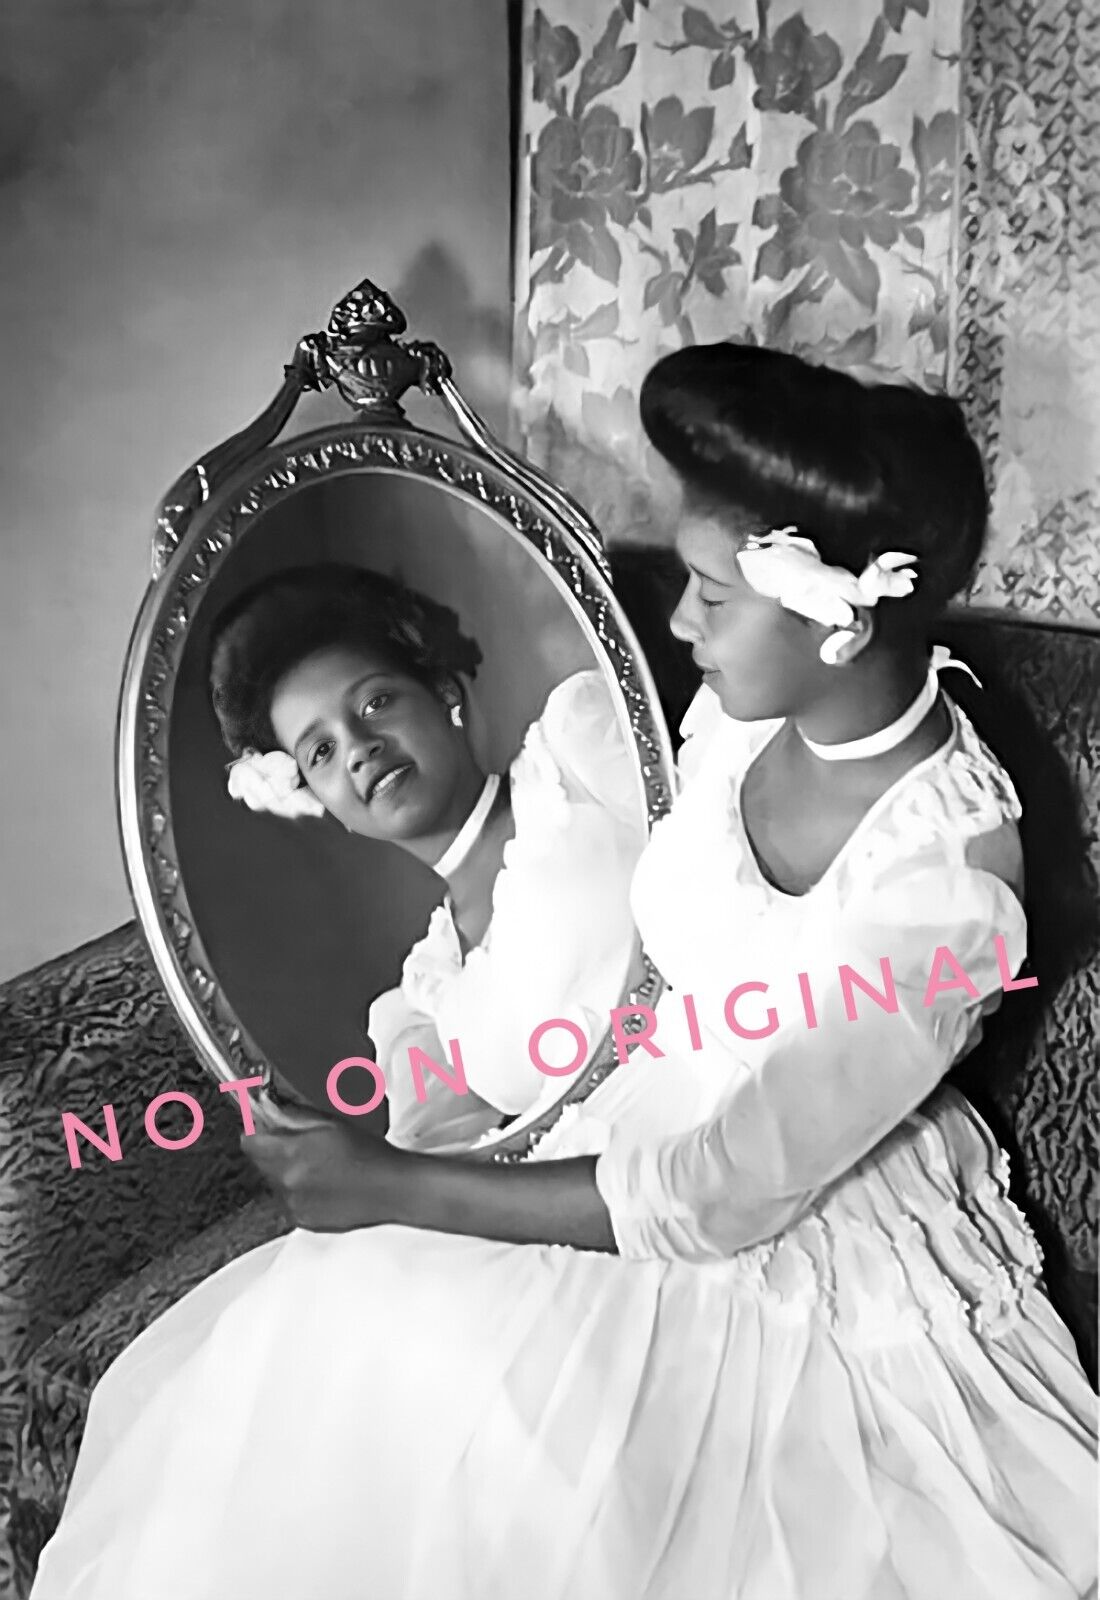 Vintage 1910's Photo Reprint of Edwardian African American Woman Looks in Mirror